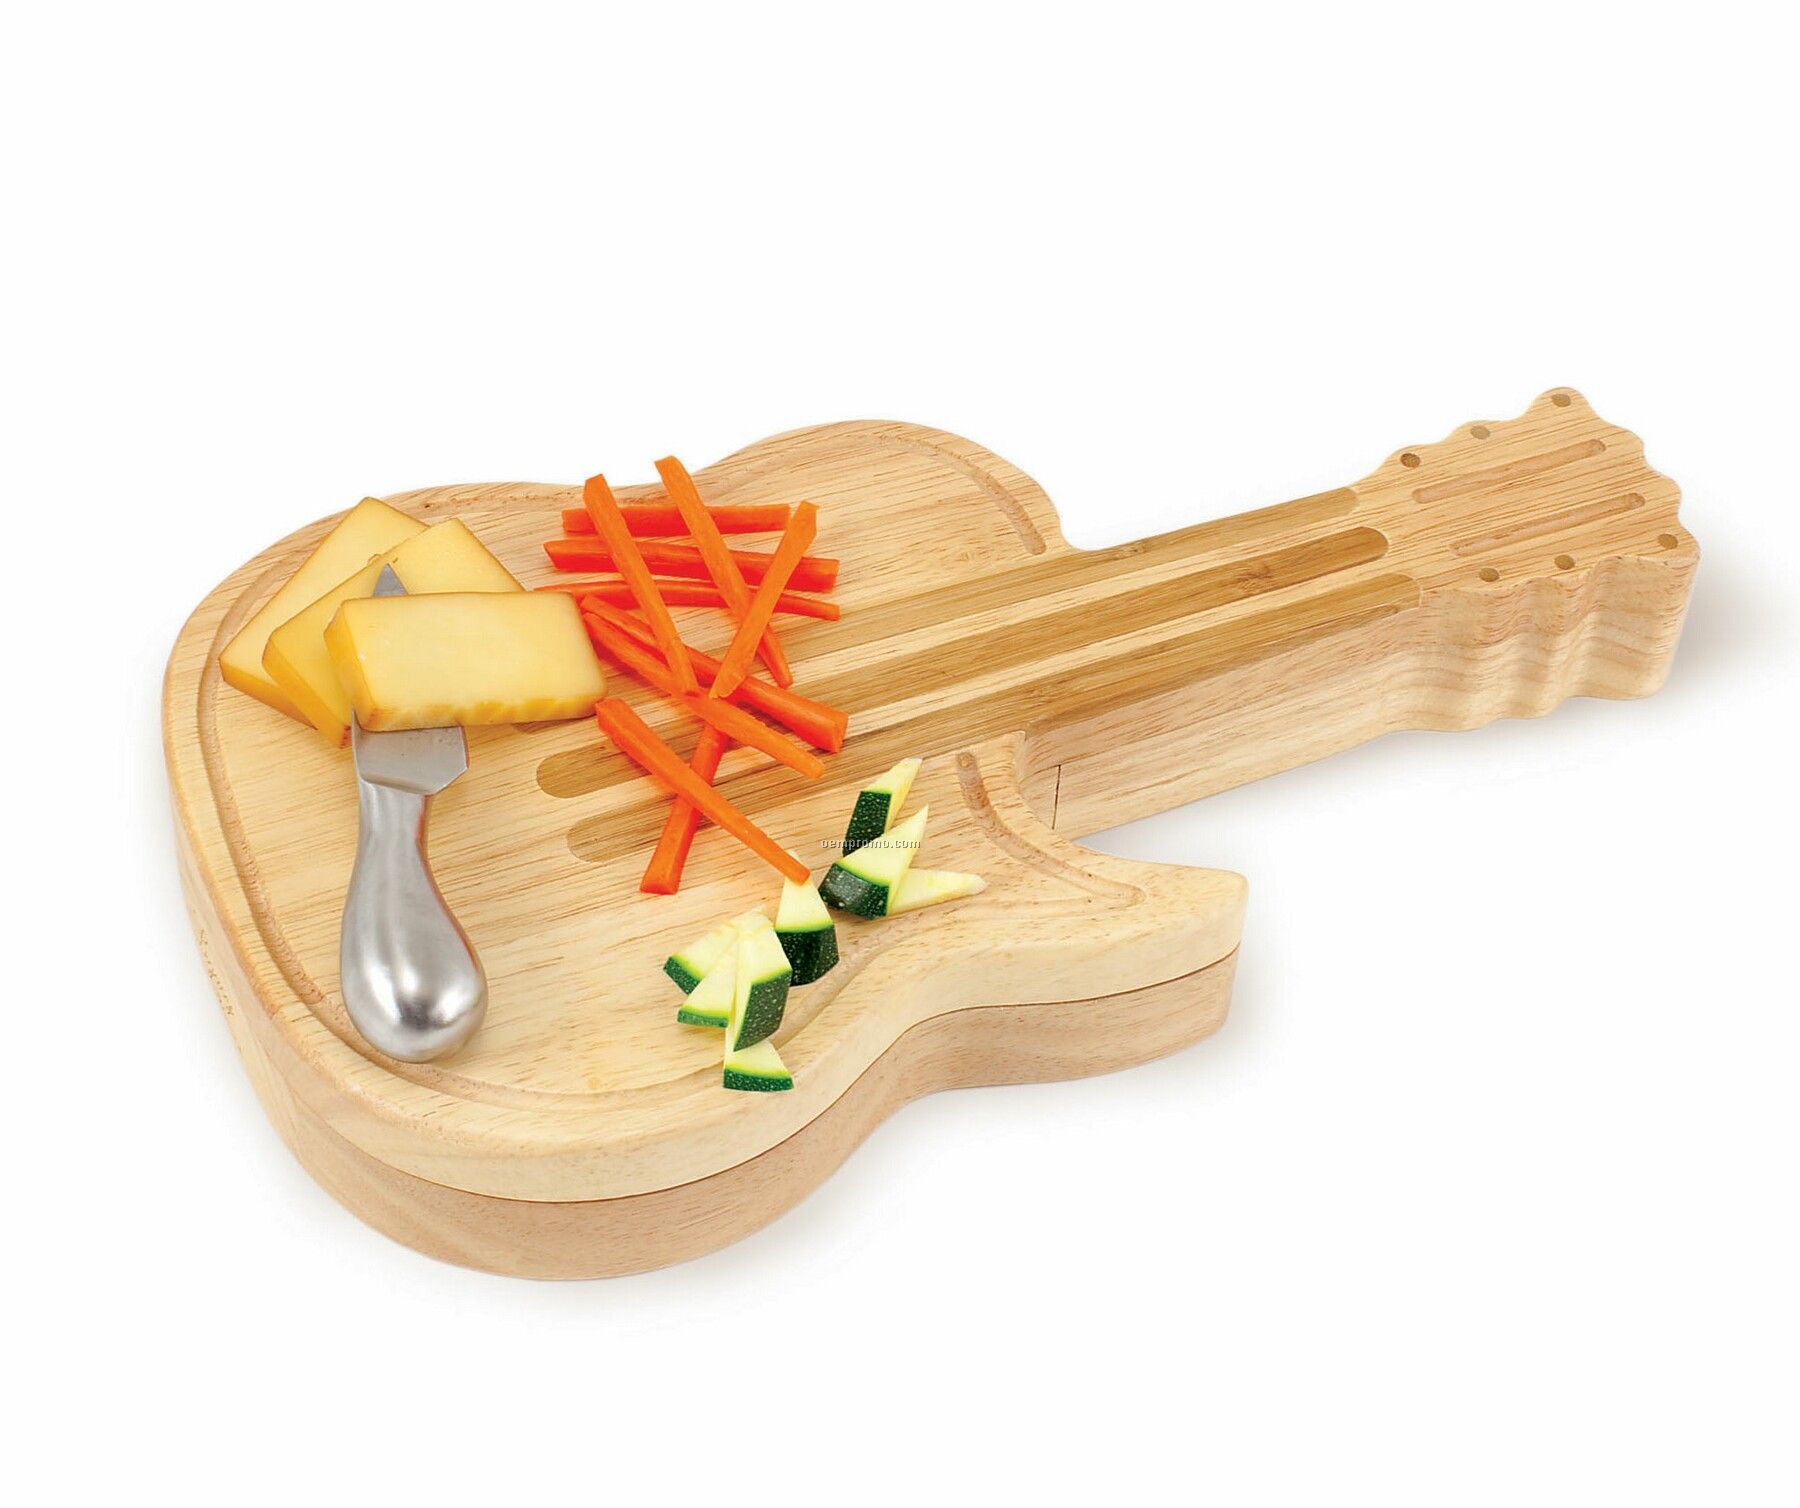 Guitar Shaped Rubber Wood Cutting Board W/ 3 Wine & Cheese Tools